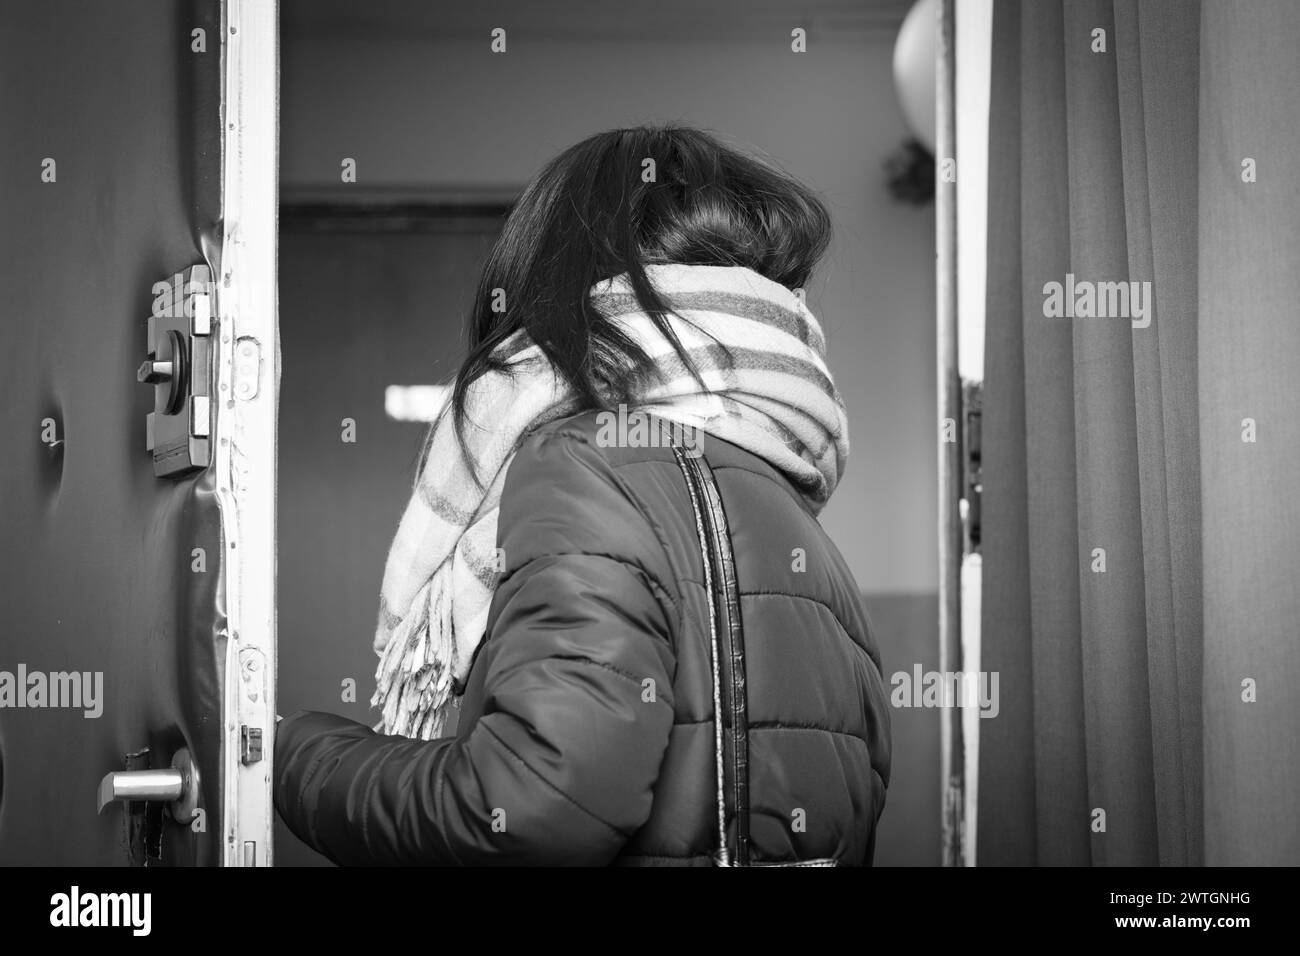 Woman wearing a shawl, in the doorway leaving the flat. Black and white. Stock Photo